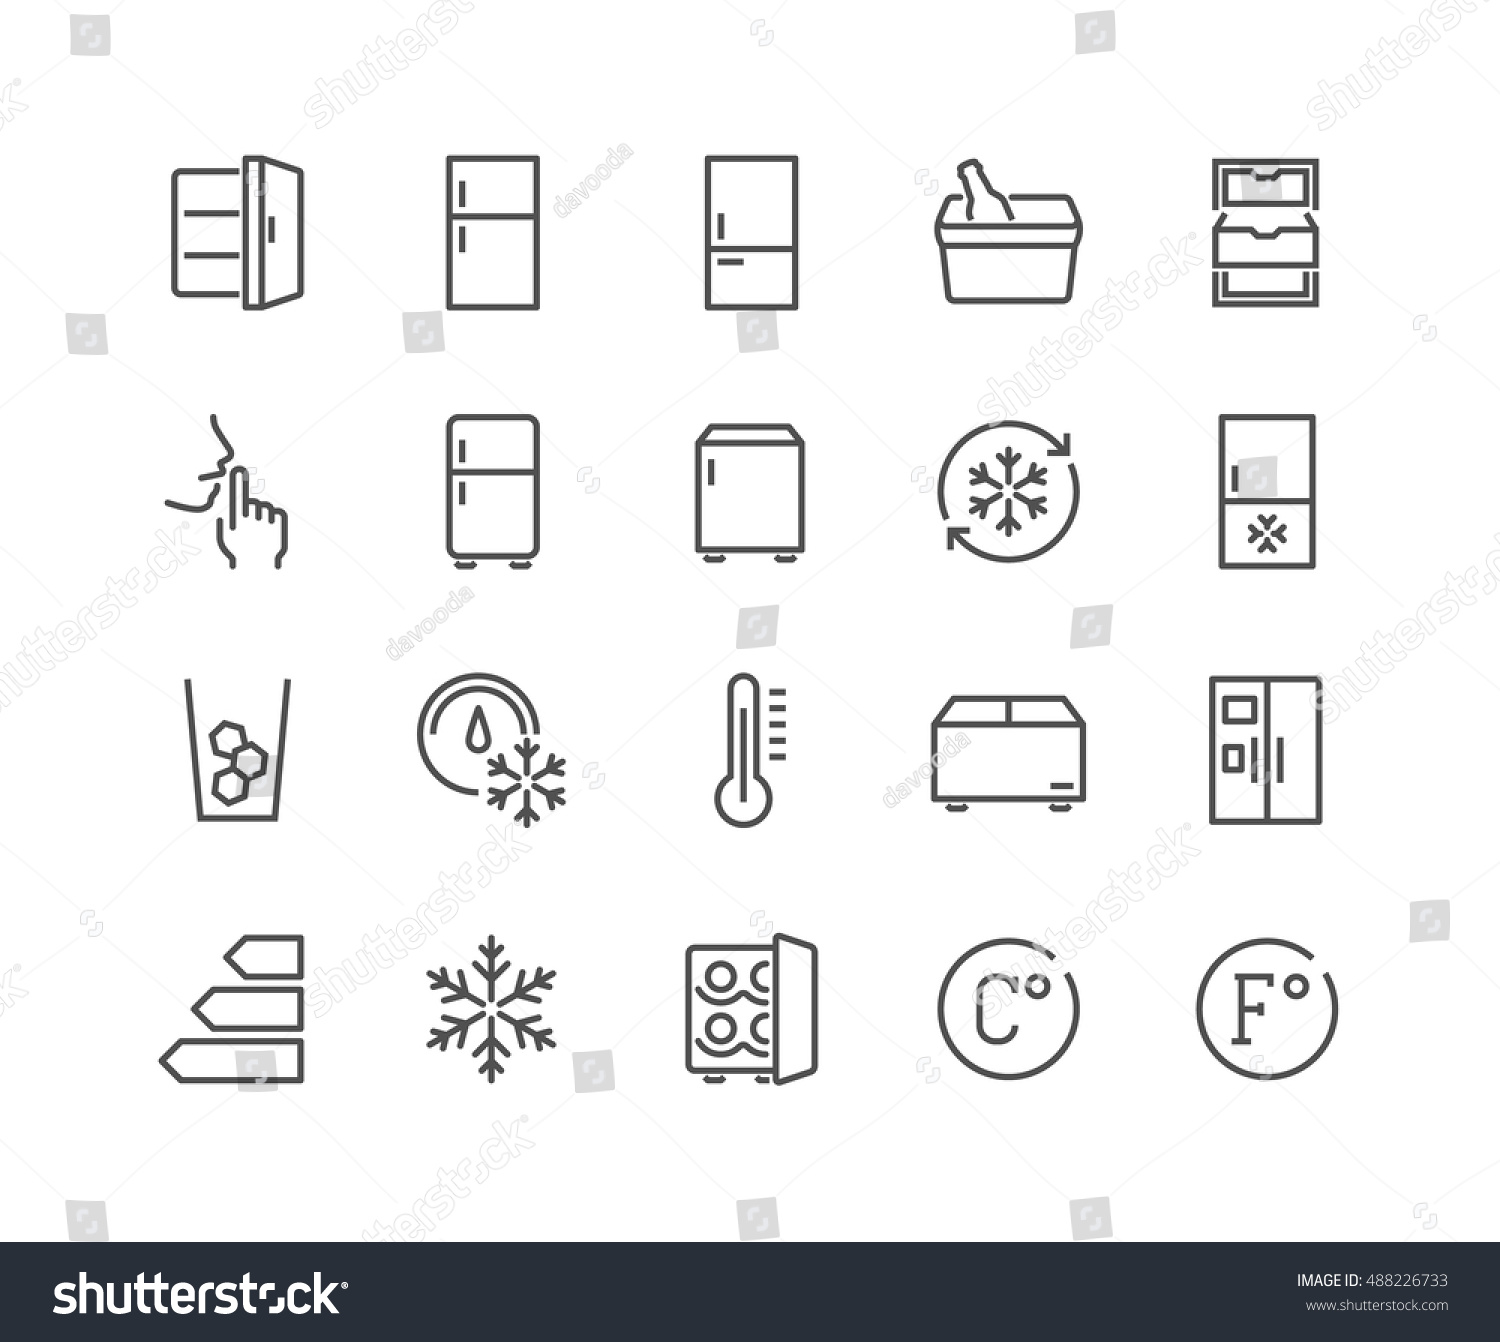 SVG of Simple Set of Fridge Related Vector Line Icons. 
Contains such Icons as Portable Fridge, Ice Machine, Silence and more.
Editable Stroke. 48x48 Pixel Perfect. svg